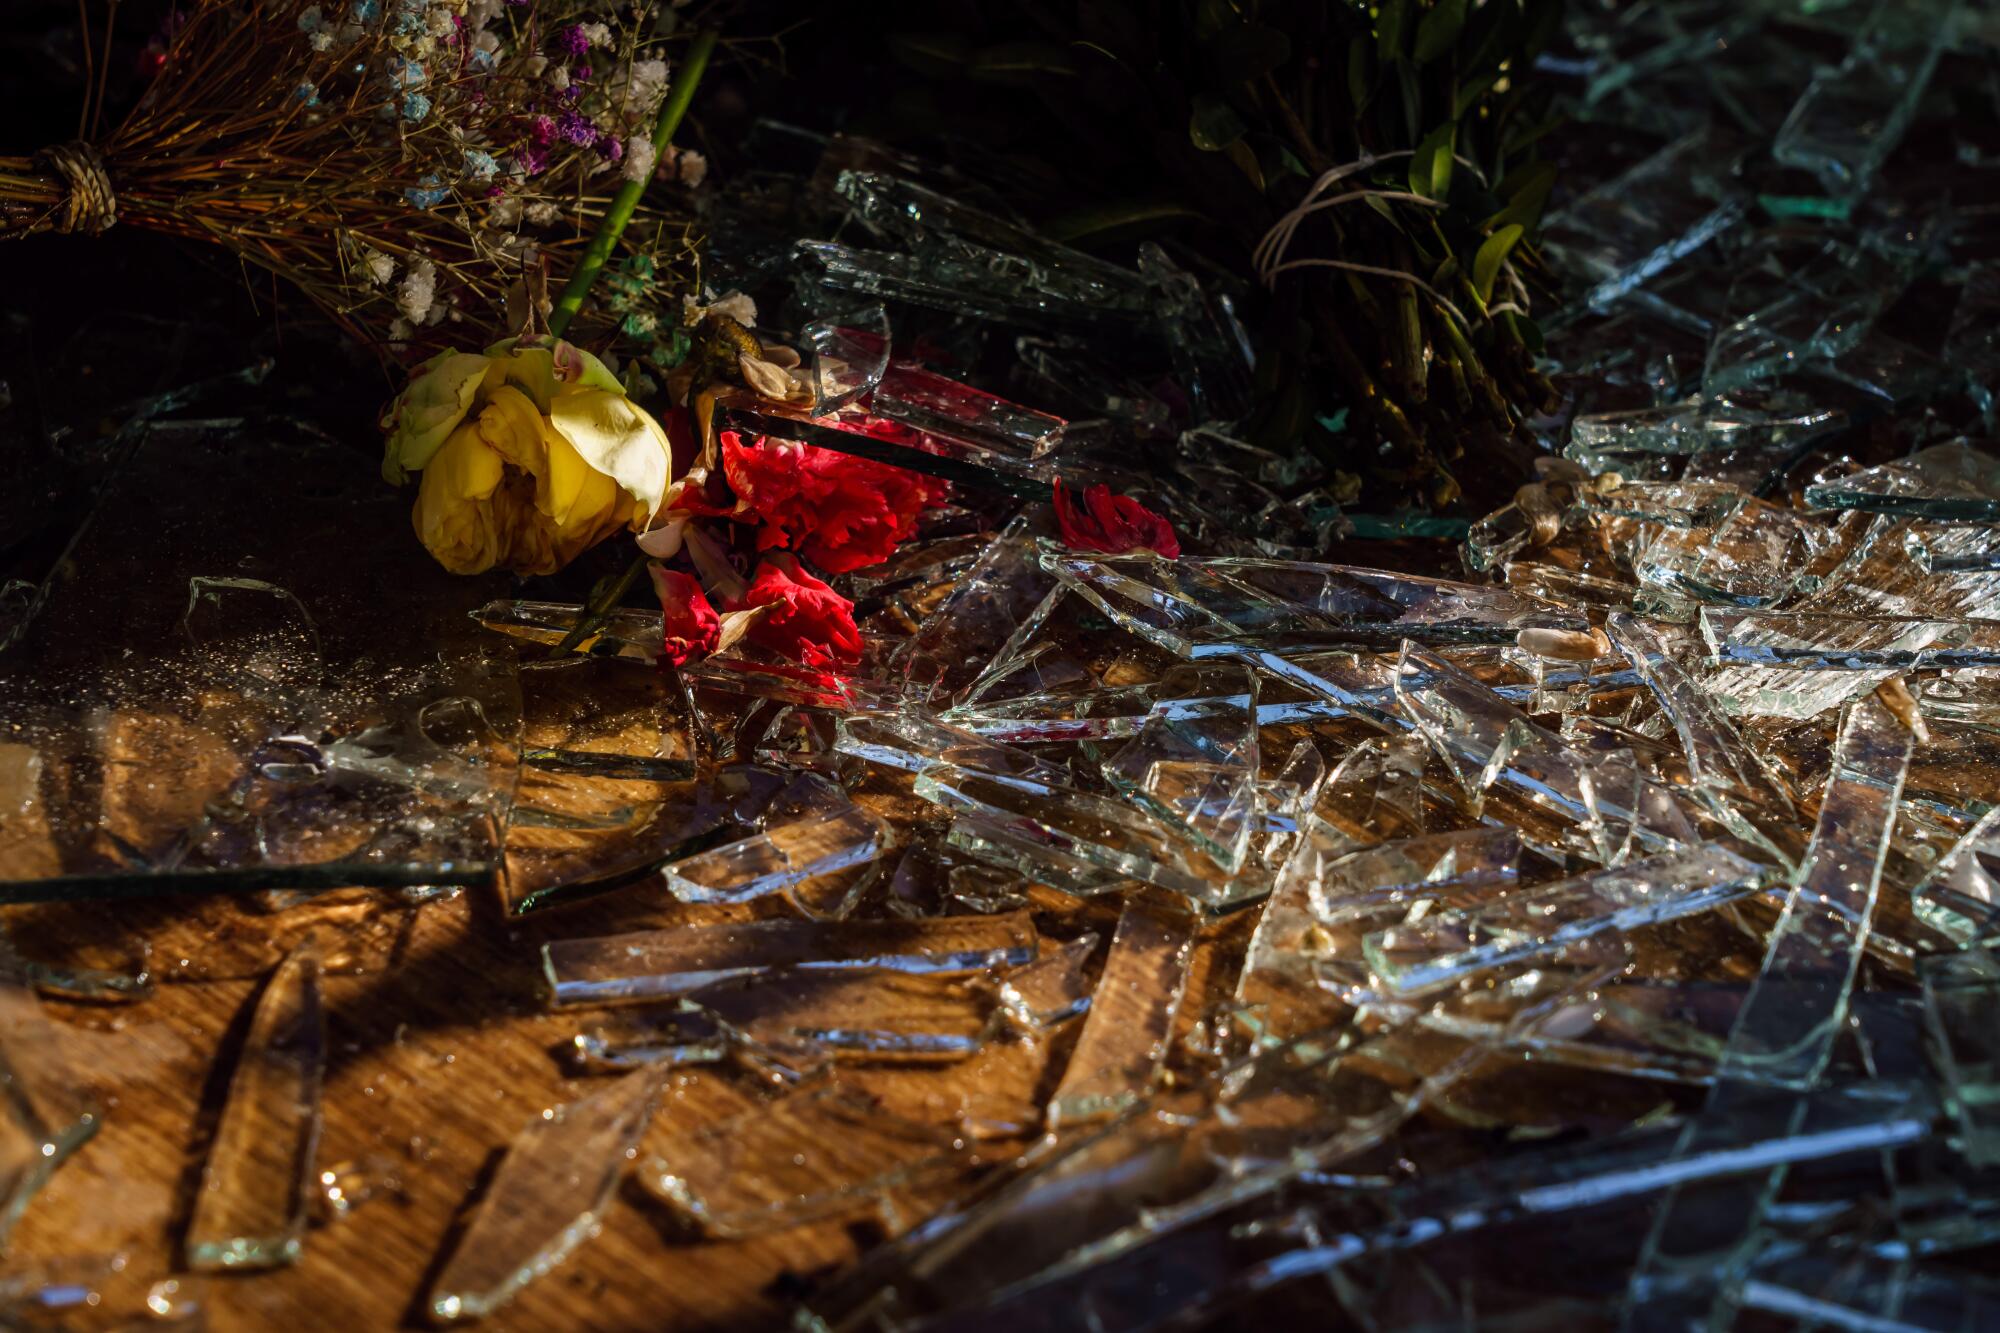 Shards of glass and flowers cover the ground inside a floral shop damaged by a Russian missile strike in Kyiv, Ukraine